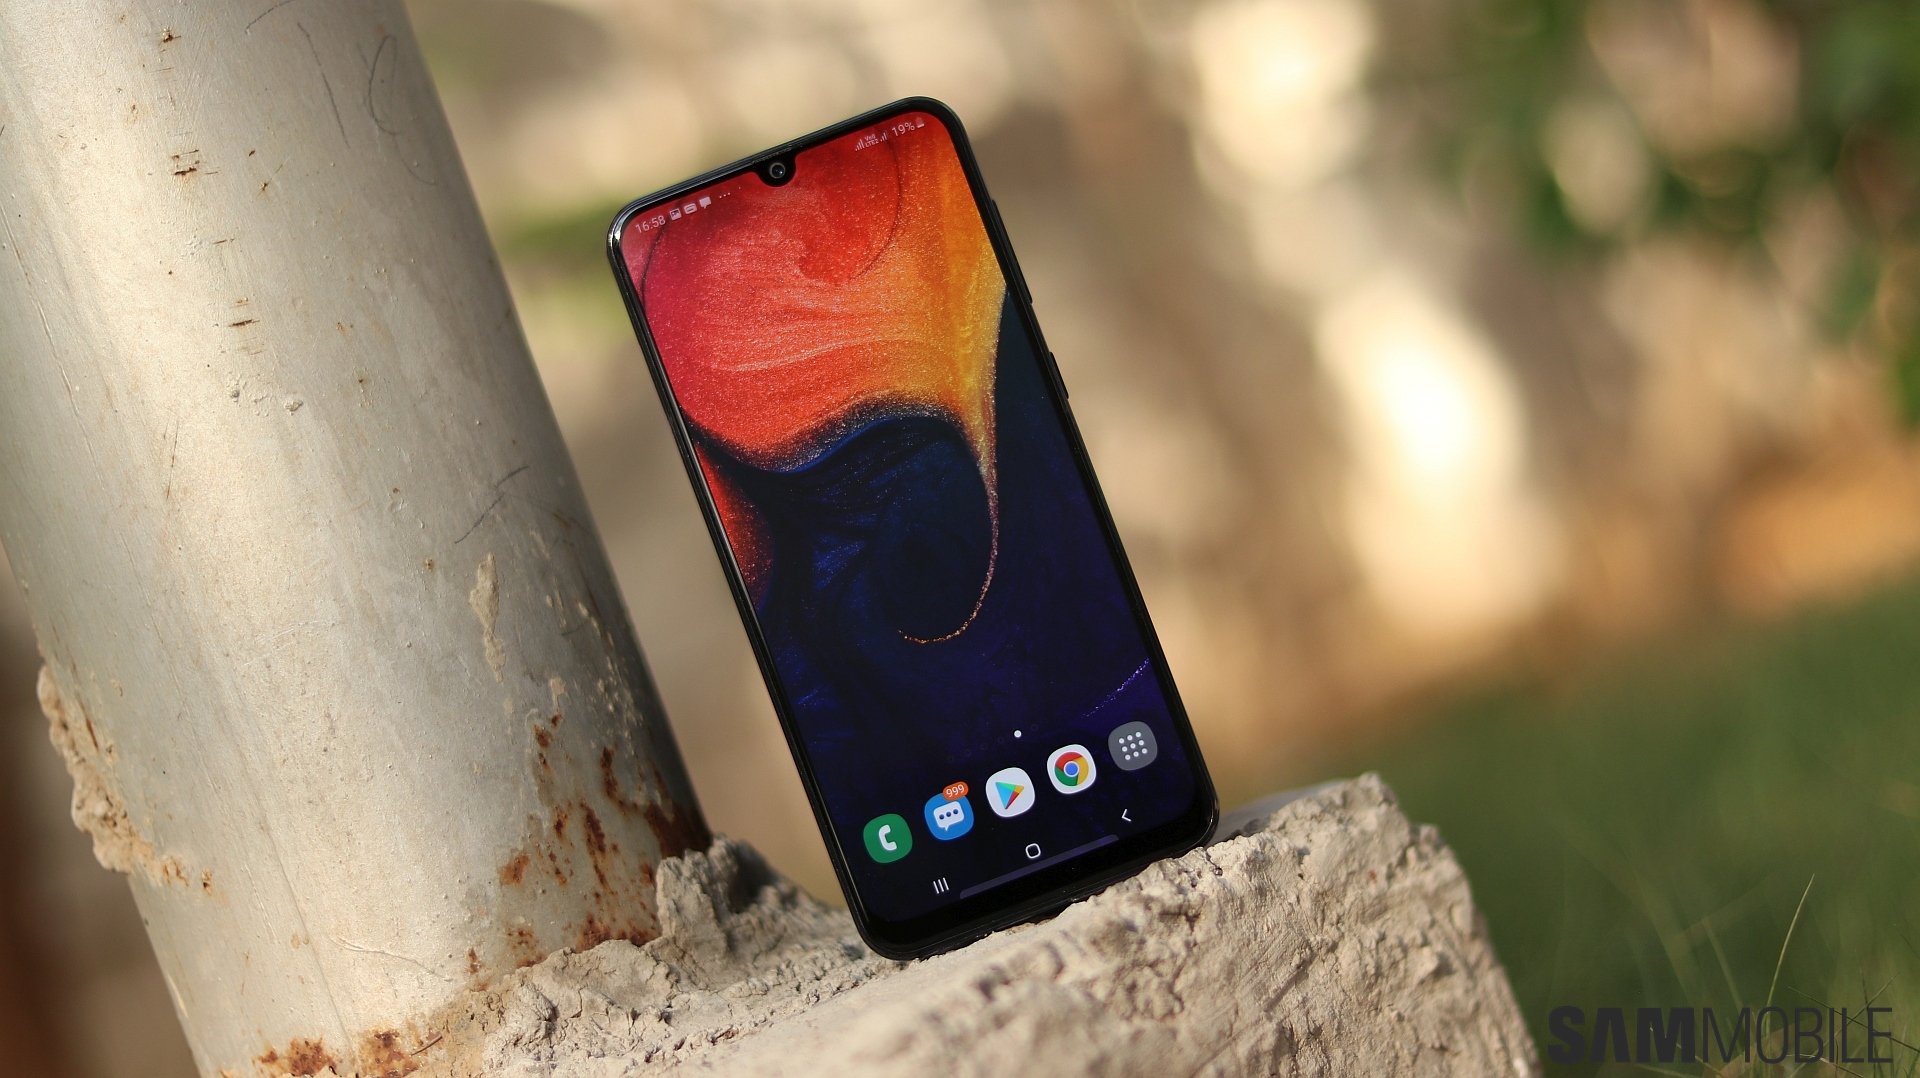 fundament Hoes karakter Galaxy A50 review: Samsung's most value-for-money mid-ranger yet - SamMobile